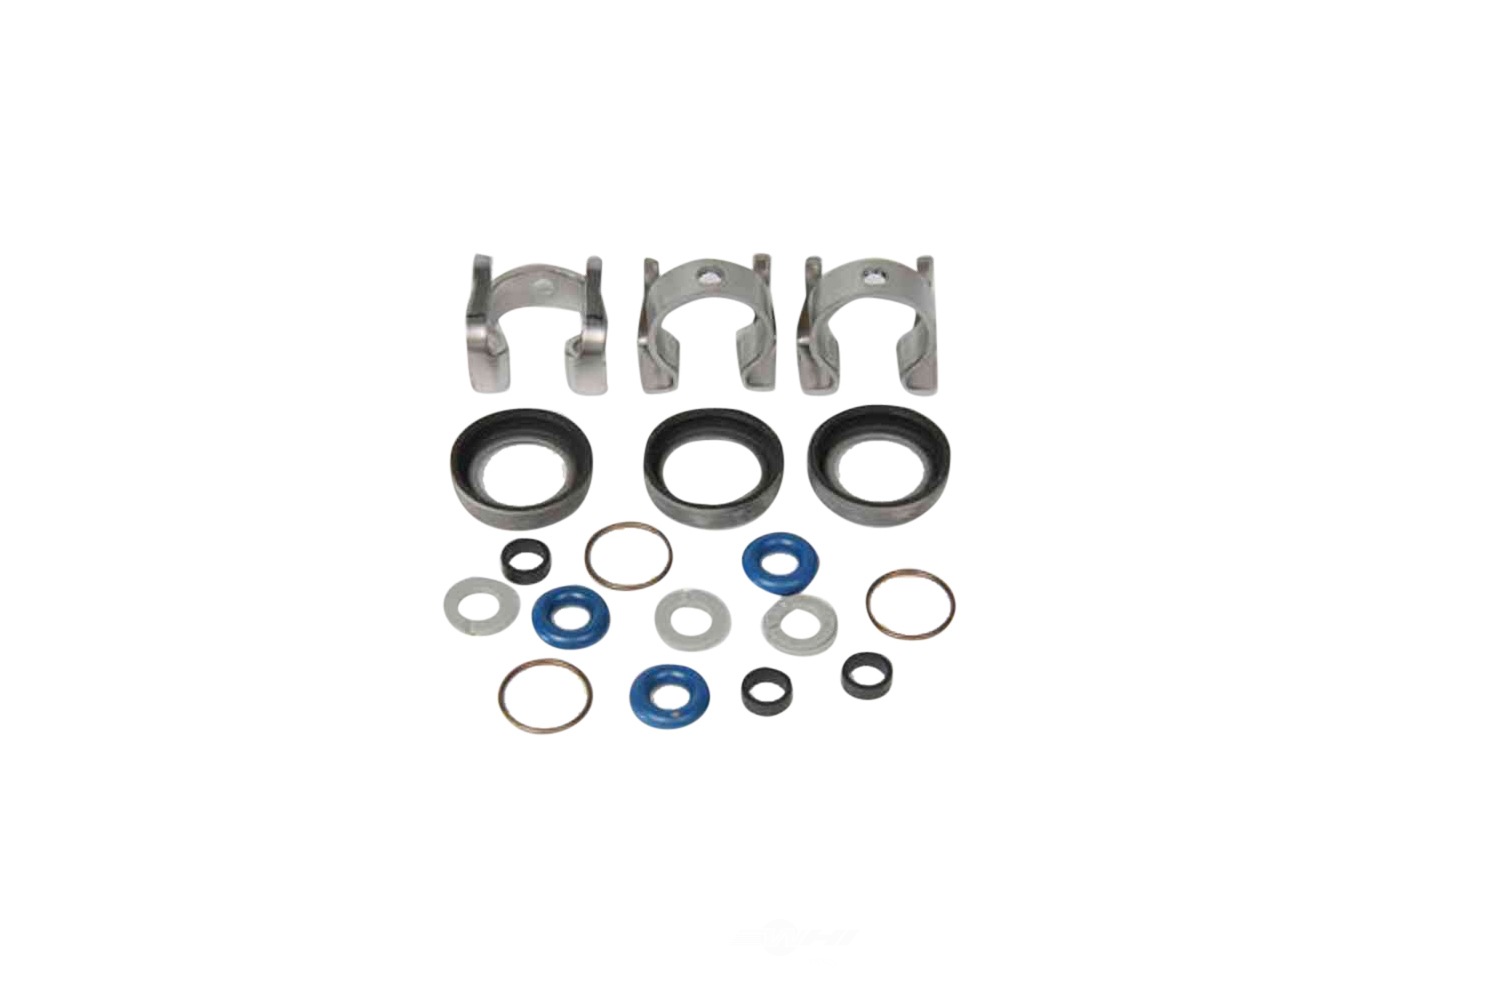 GM GENUINE PARTS CANADA - Fuel Injector Seal Kit - GMC 217-3096